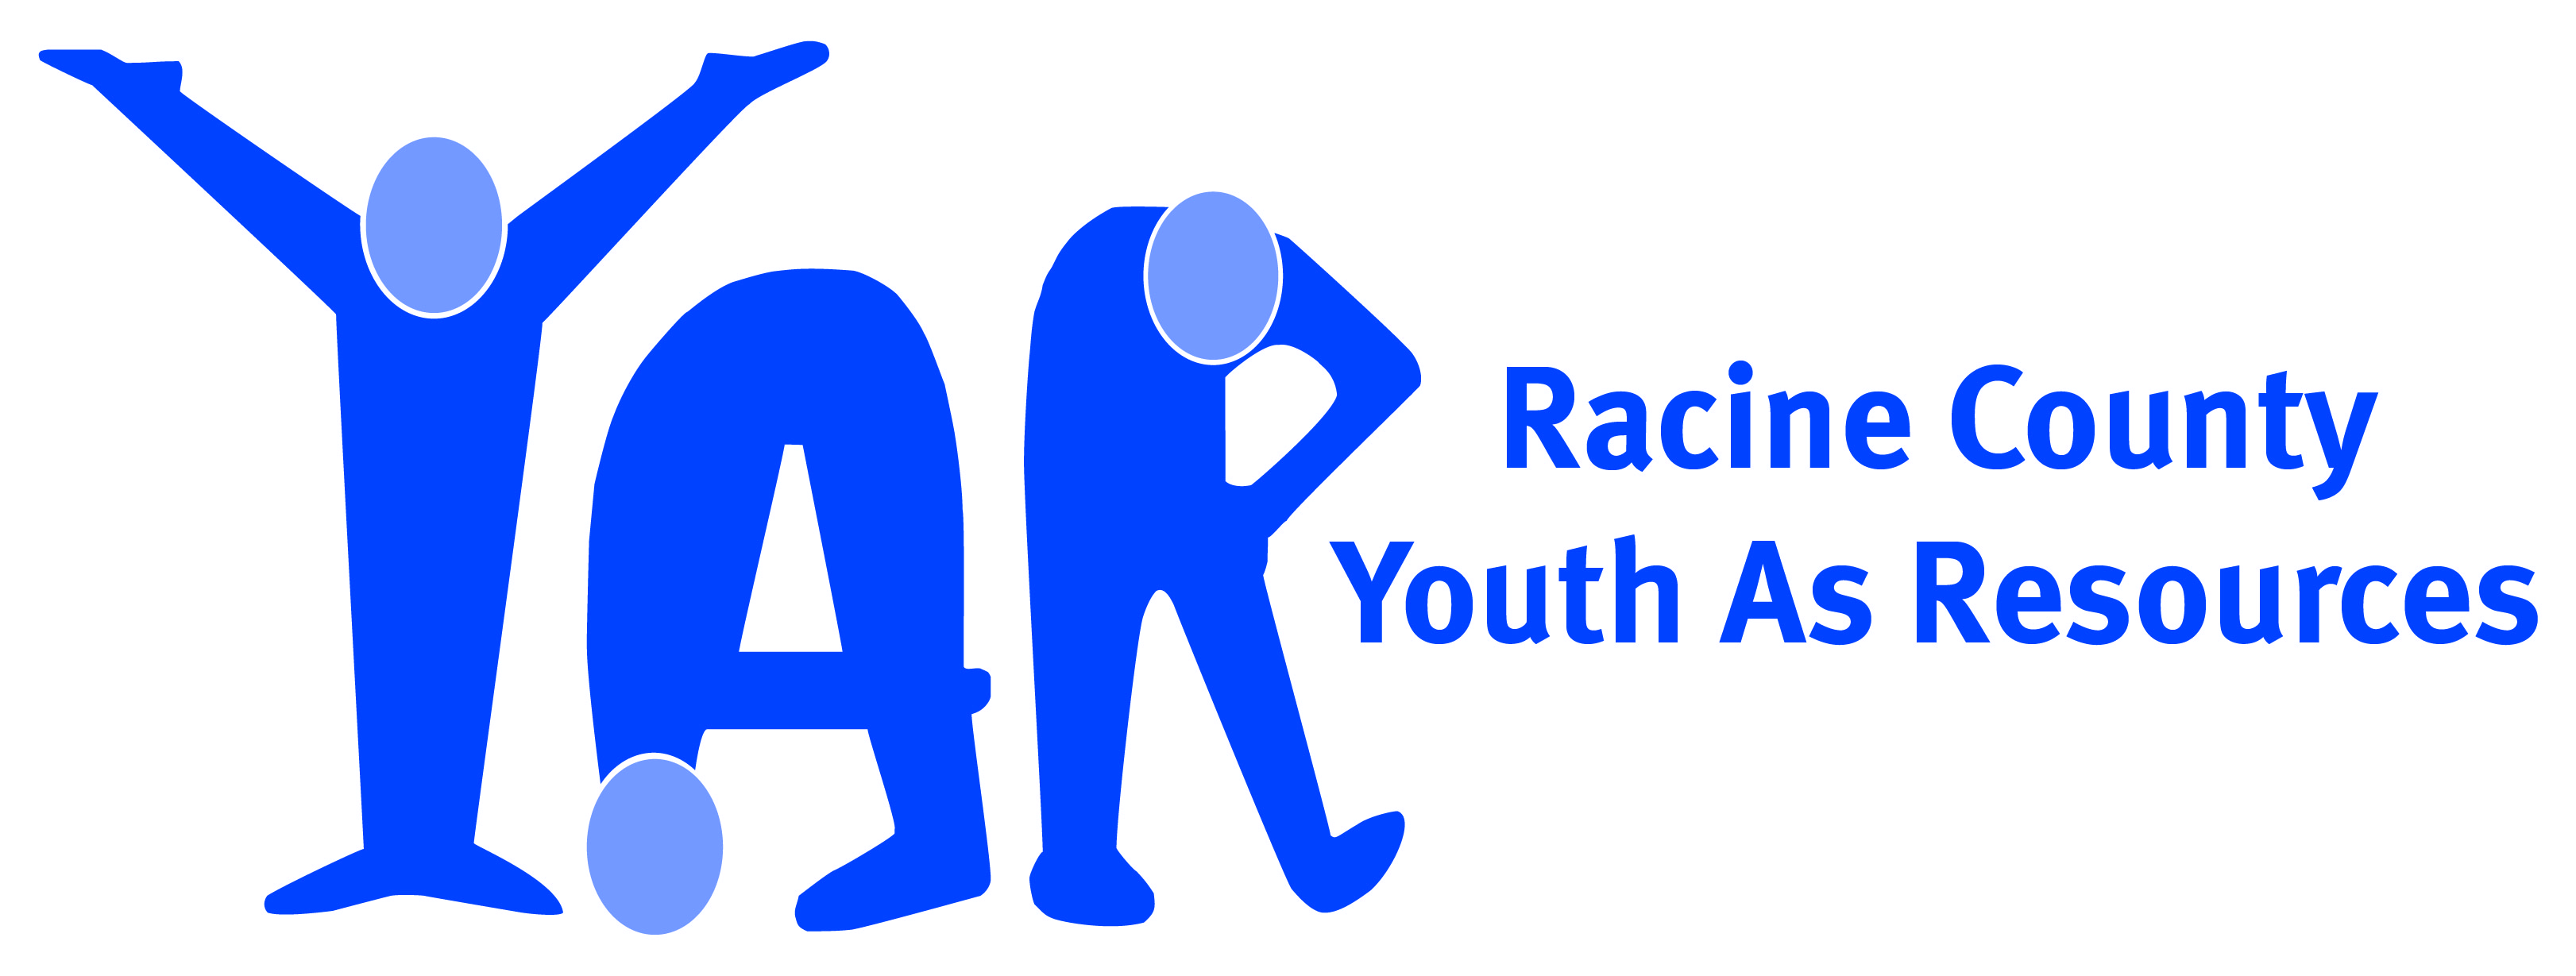 The YAR, Youth as Resources, logo. 